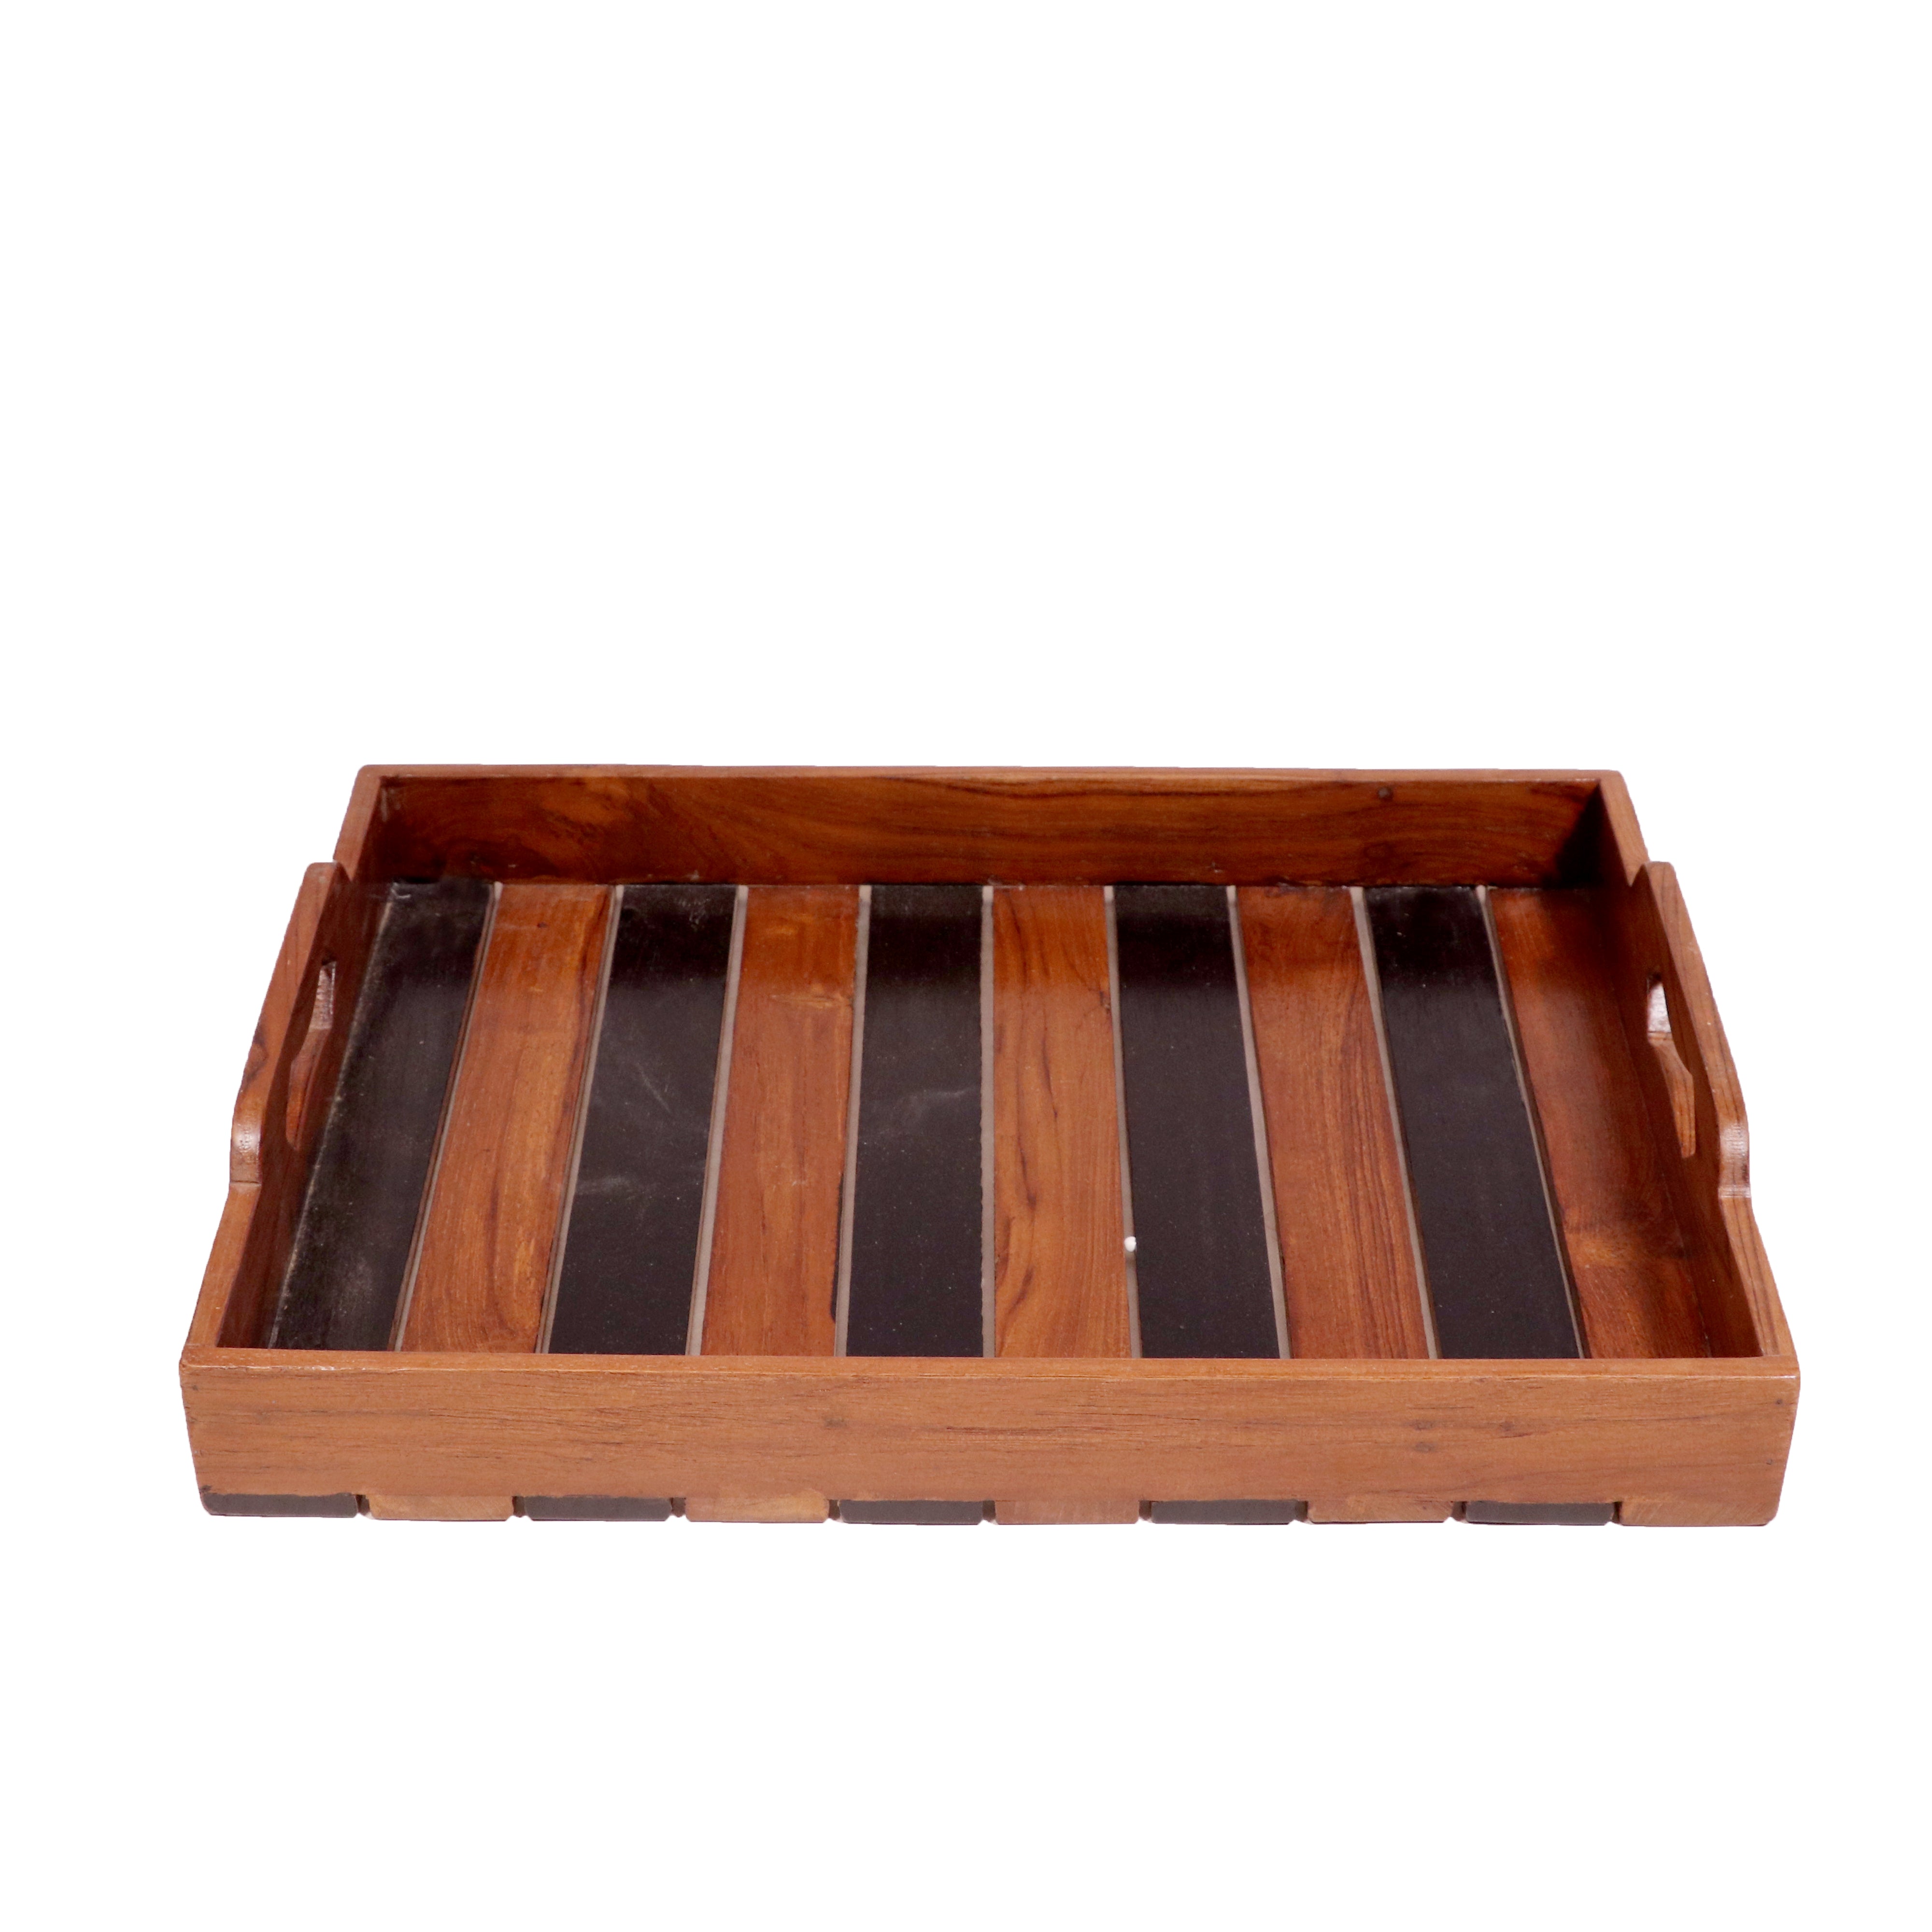 Stripped Sober Styled Handmade Wooden Tray - Set of 3 Tray